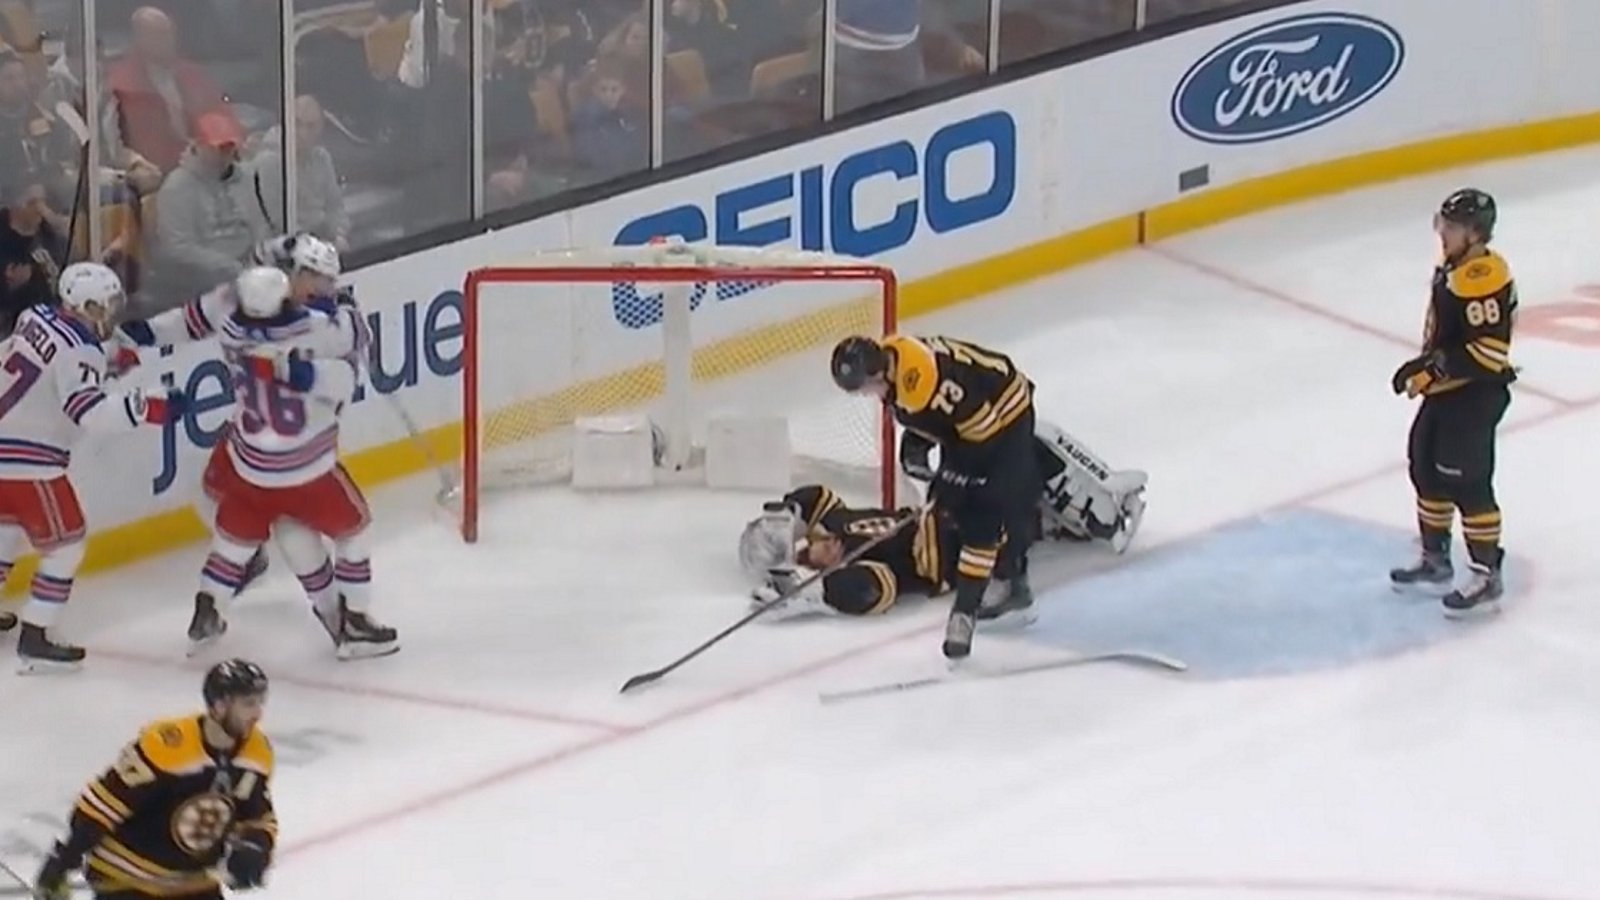 Tuukka Rask hurt after getting bulldozed into his own net.